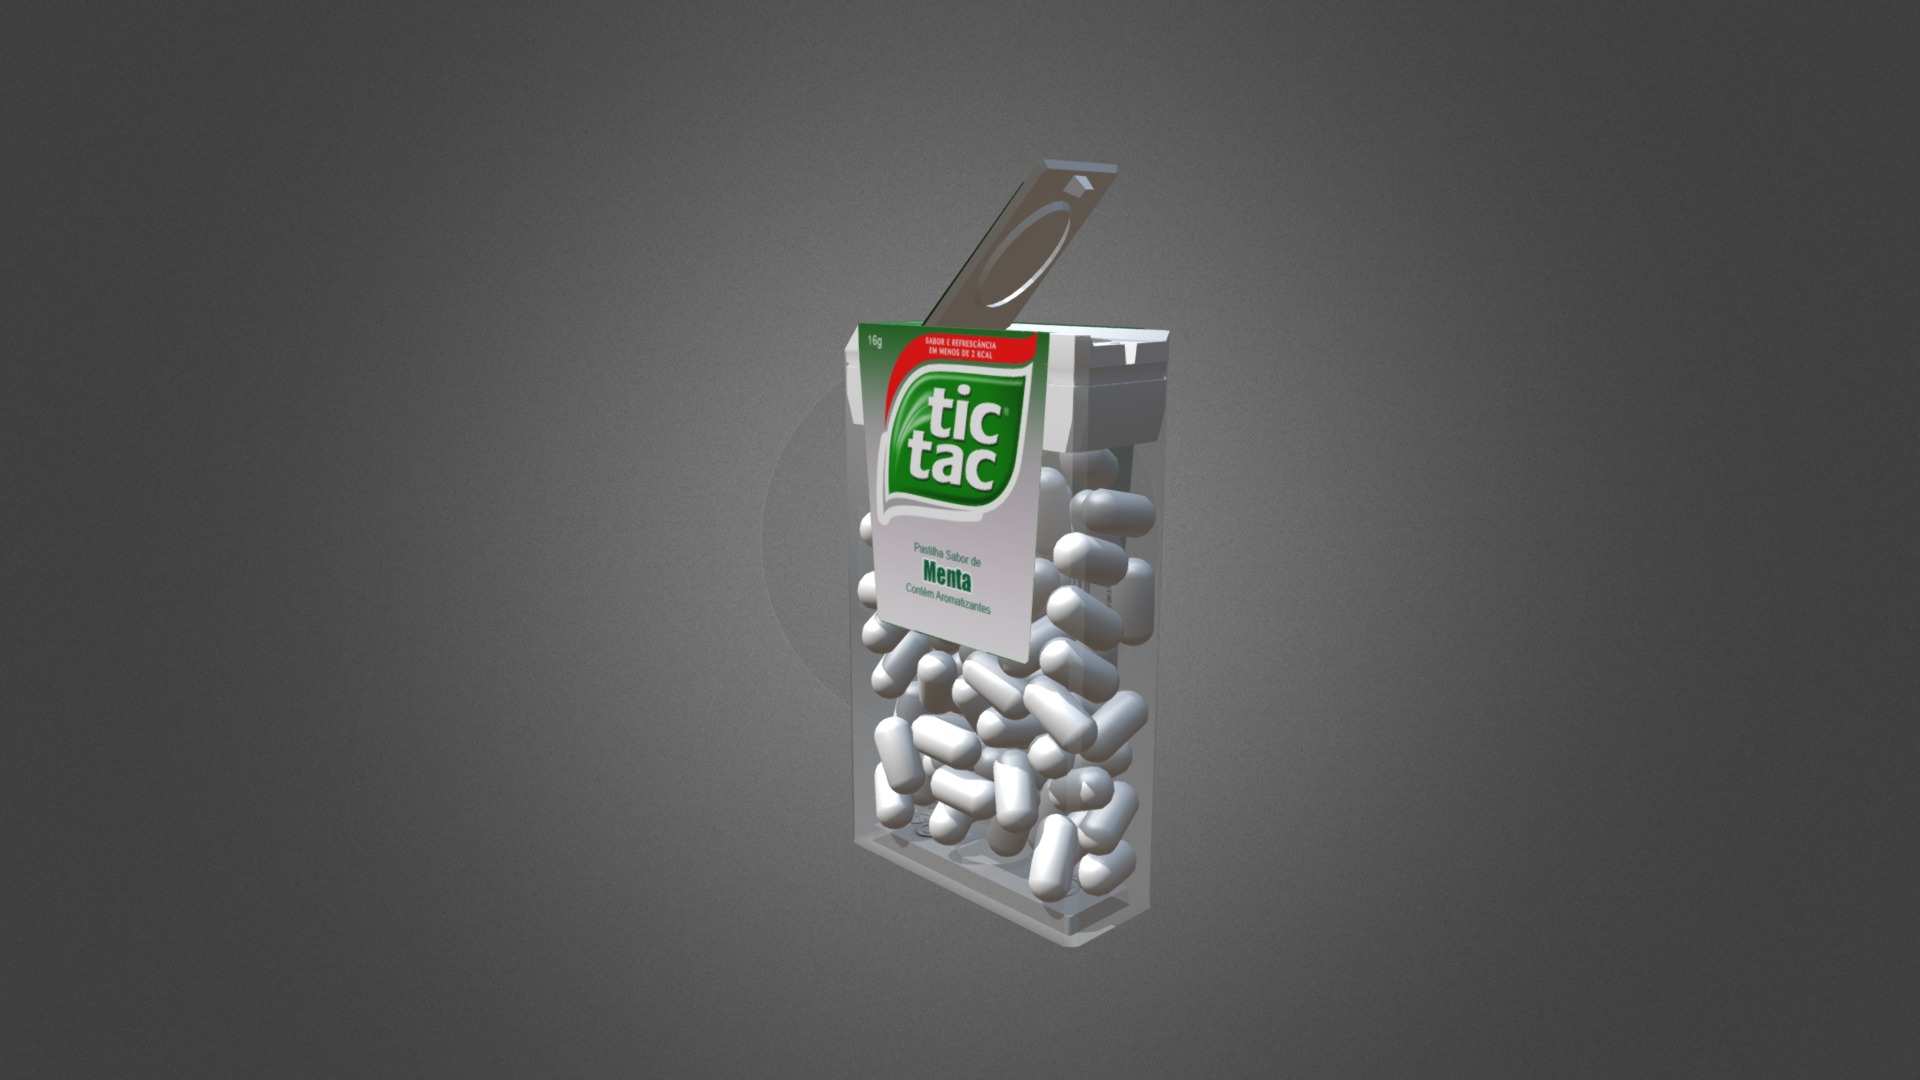 3D model TicTac Brazilian - This is a 3D model of the TicTac Brazilian. The 3D model is about a white bag with a green logo.